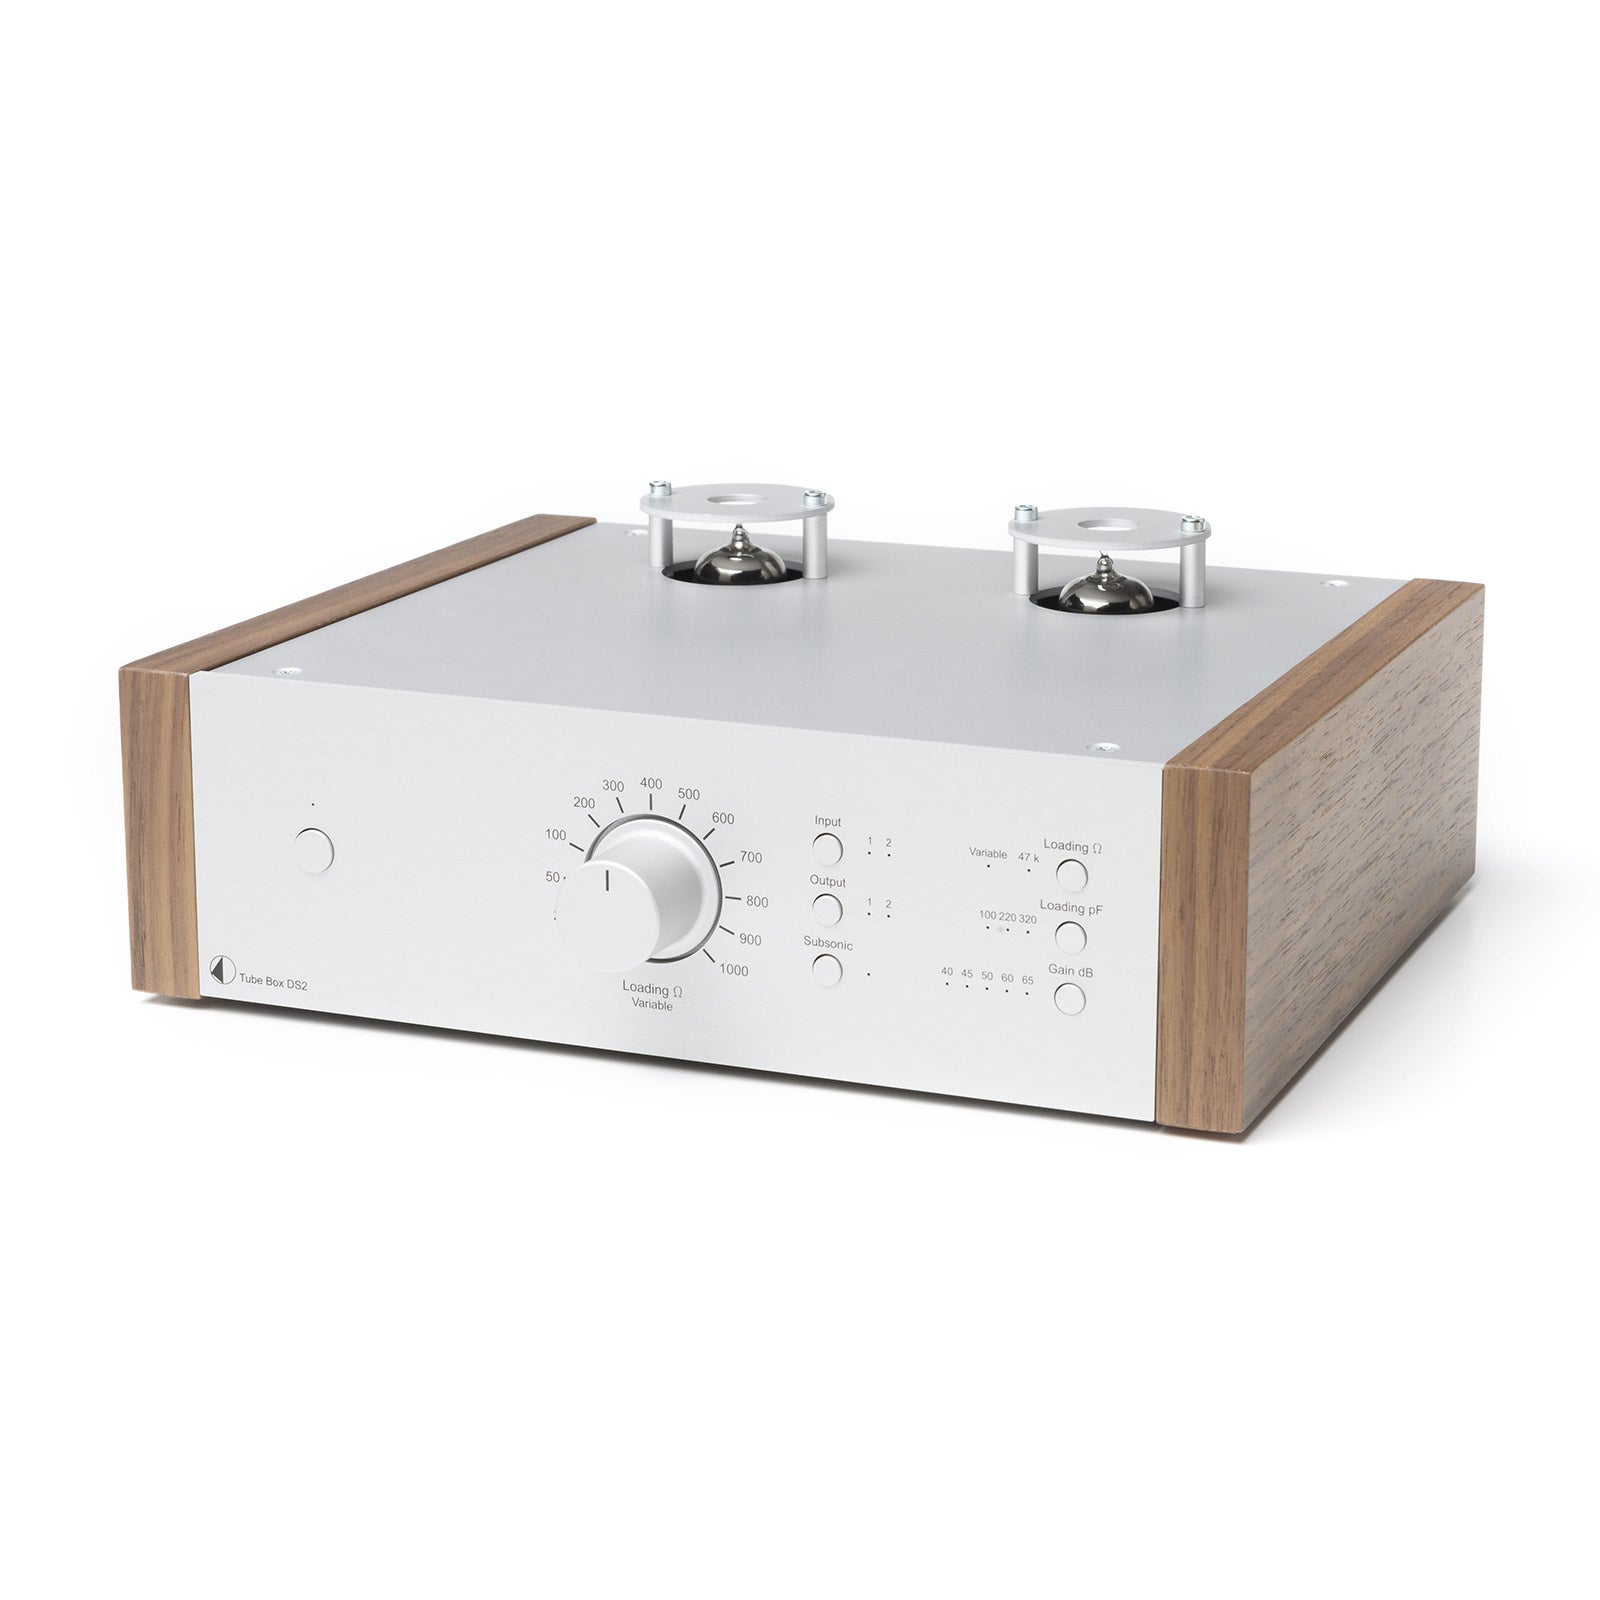 PRO-JECT TUBE BOX DS2 SILVER WALNUT UNI - Vinyl Sound - Pro-ject Audio at Vinyl Sound. Available at the best price: Pro-ject Turntables X1 - X8 - X2 – Pro-ject 6 PerspeX SB - RPM 1 Carbon - RPM 10 Carbon – Xtension 12 Evolution... Pro-ject HiFi Electronics Phono Preamplifier · Vinyl Recording · Pro-ject Preamplifier – Pro-ject Phono Box...